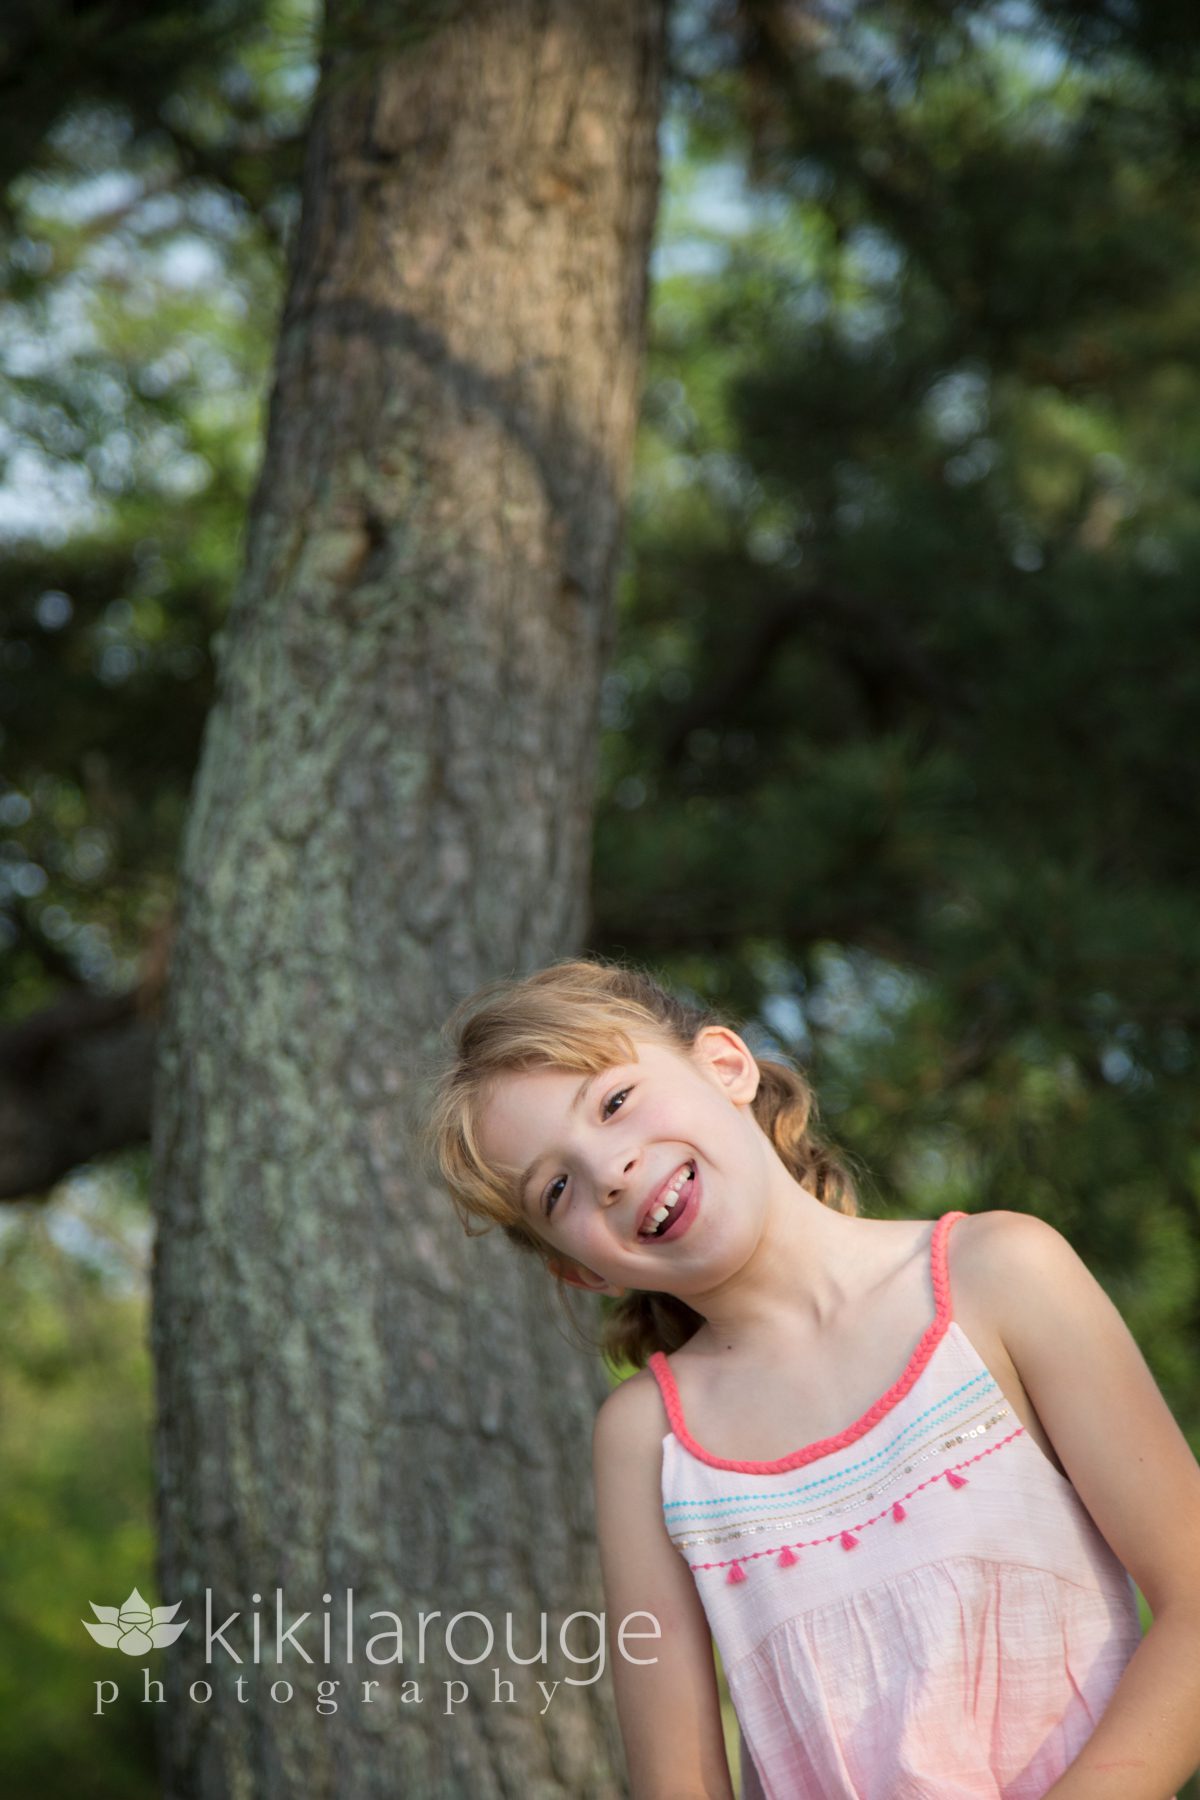 Little girl smiling by tree